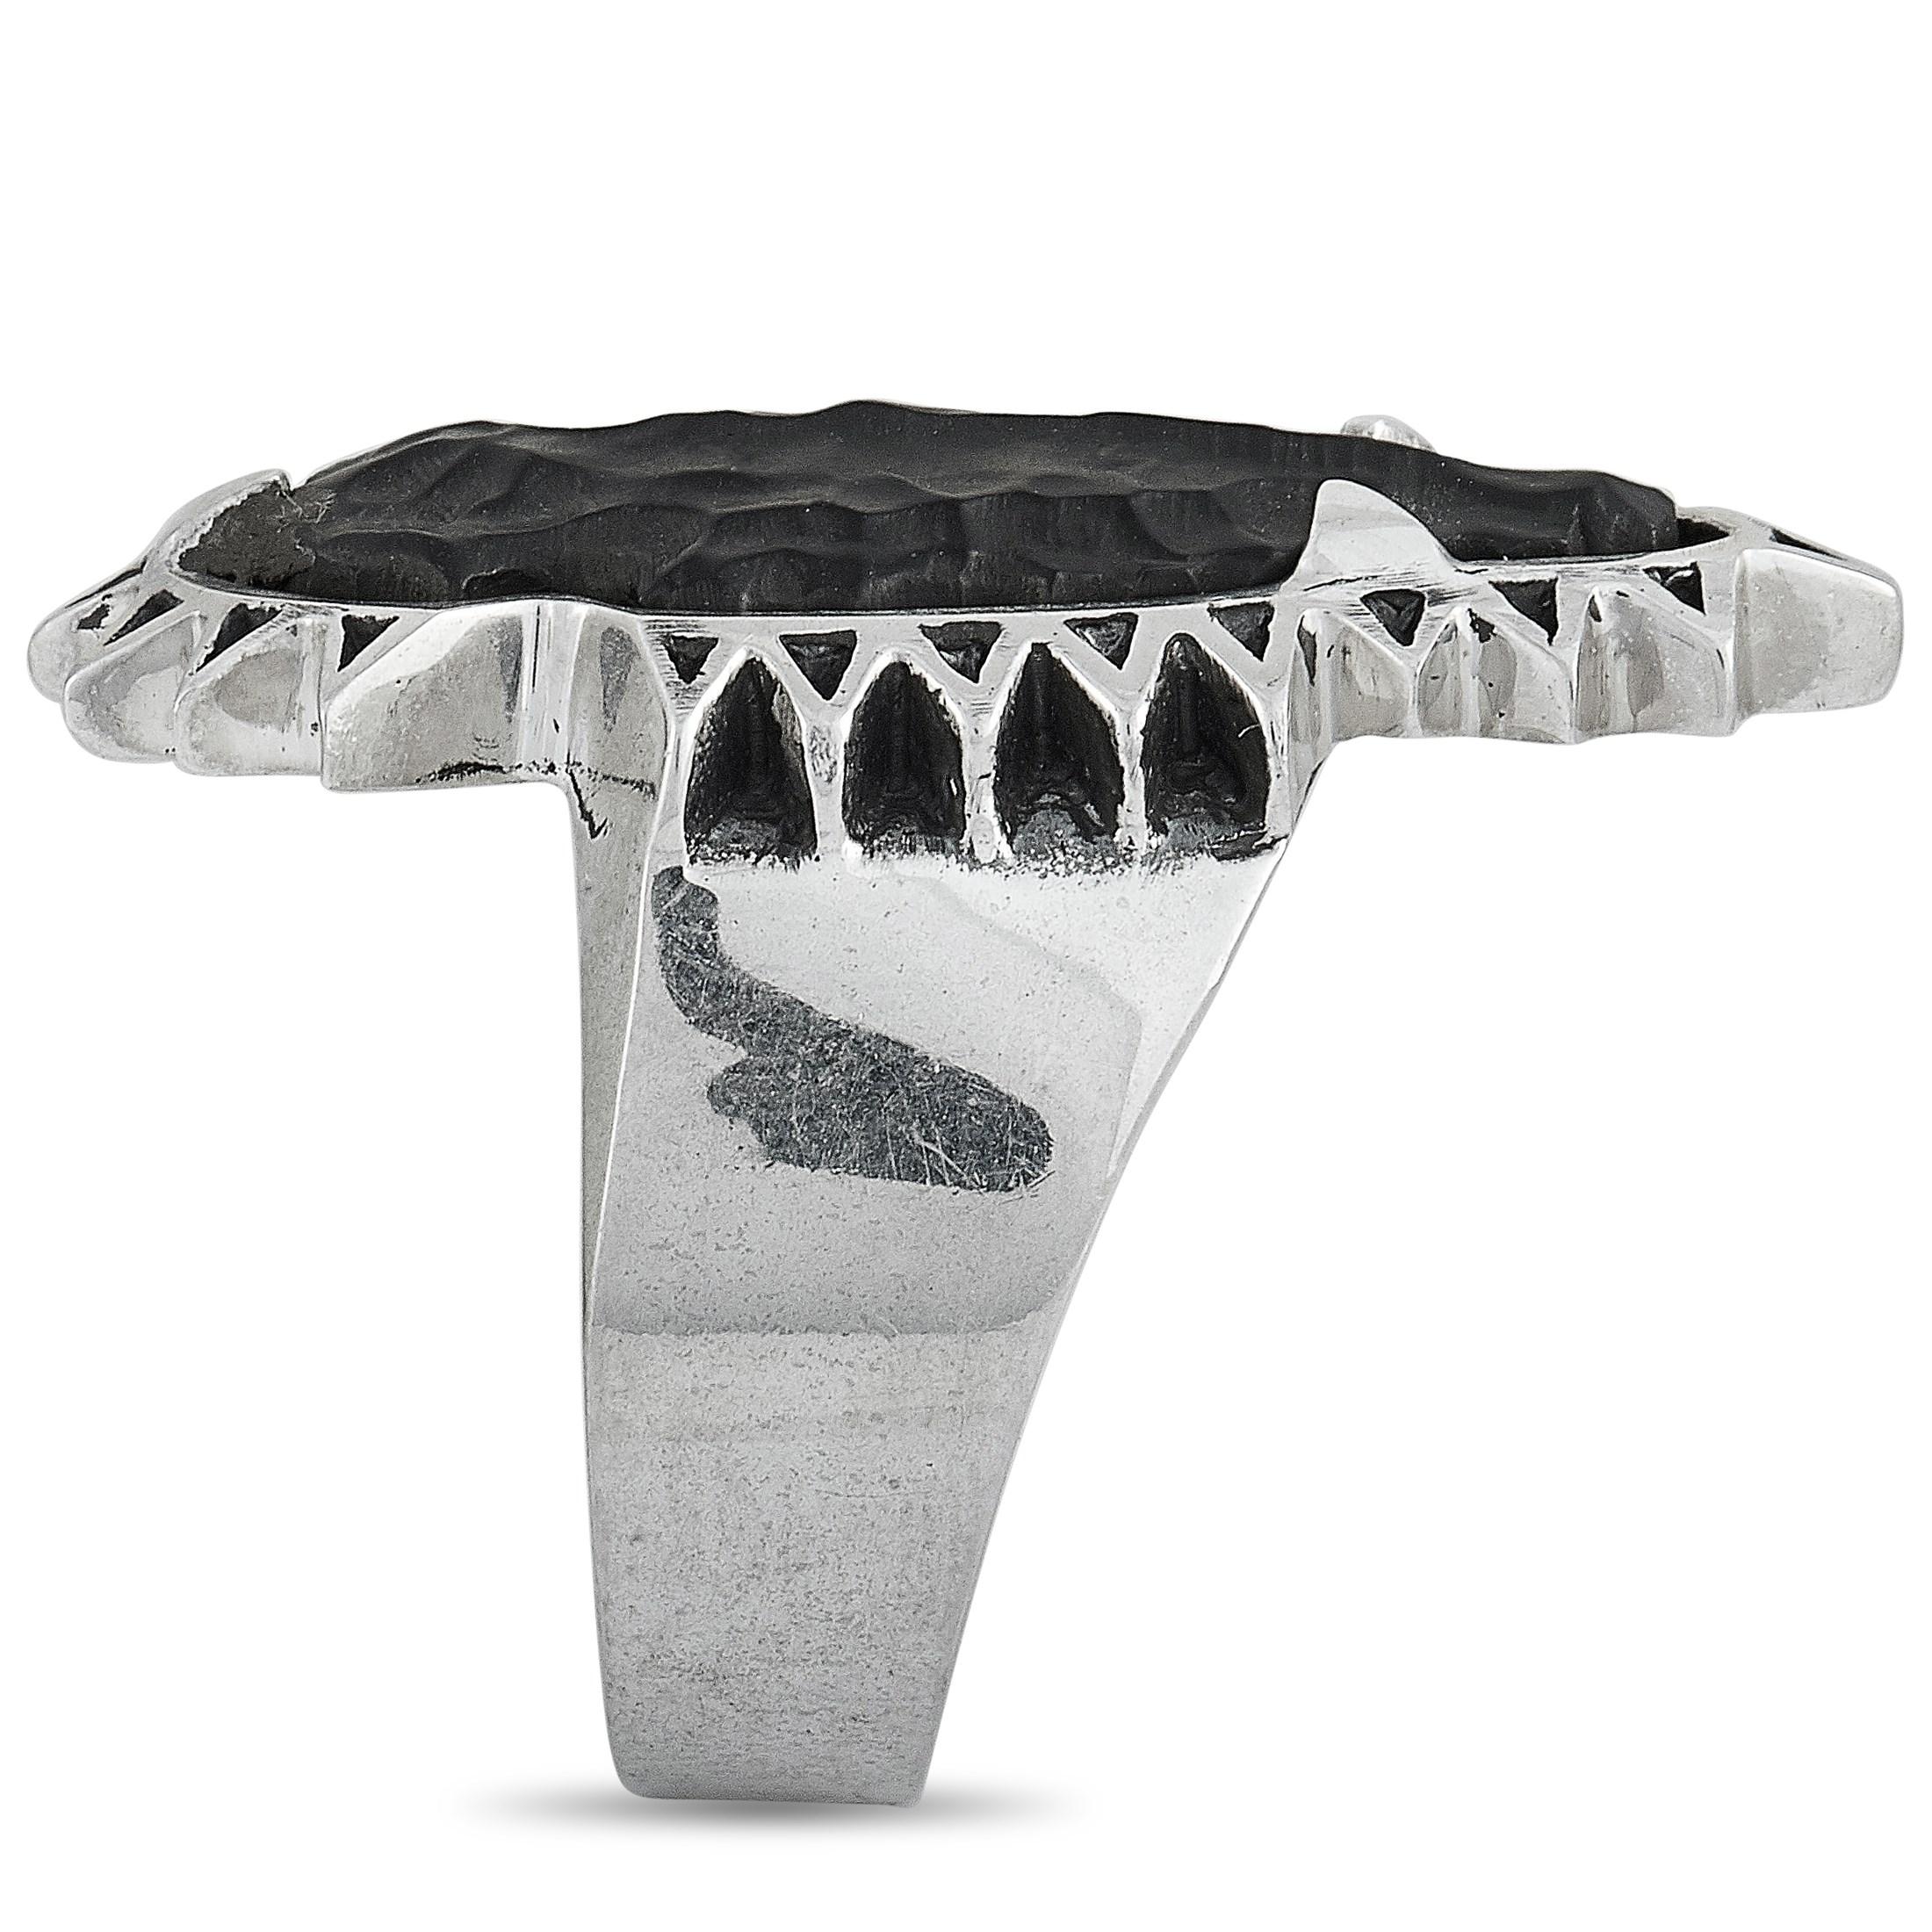 This King Baby ring is made out of silver and carved jet and weighs 30 grams. The ring boasts a band thickness of 6 mm and a top height of 7 mm, while top dimensions measure 22 by 40 mm.

Offered in brand-new condition, this item includes the